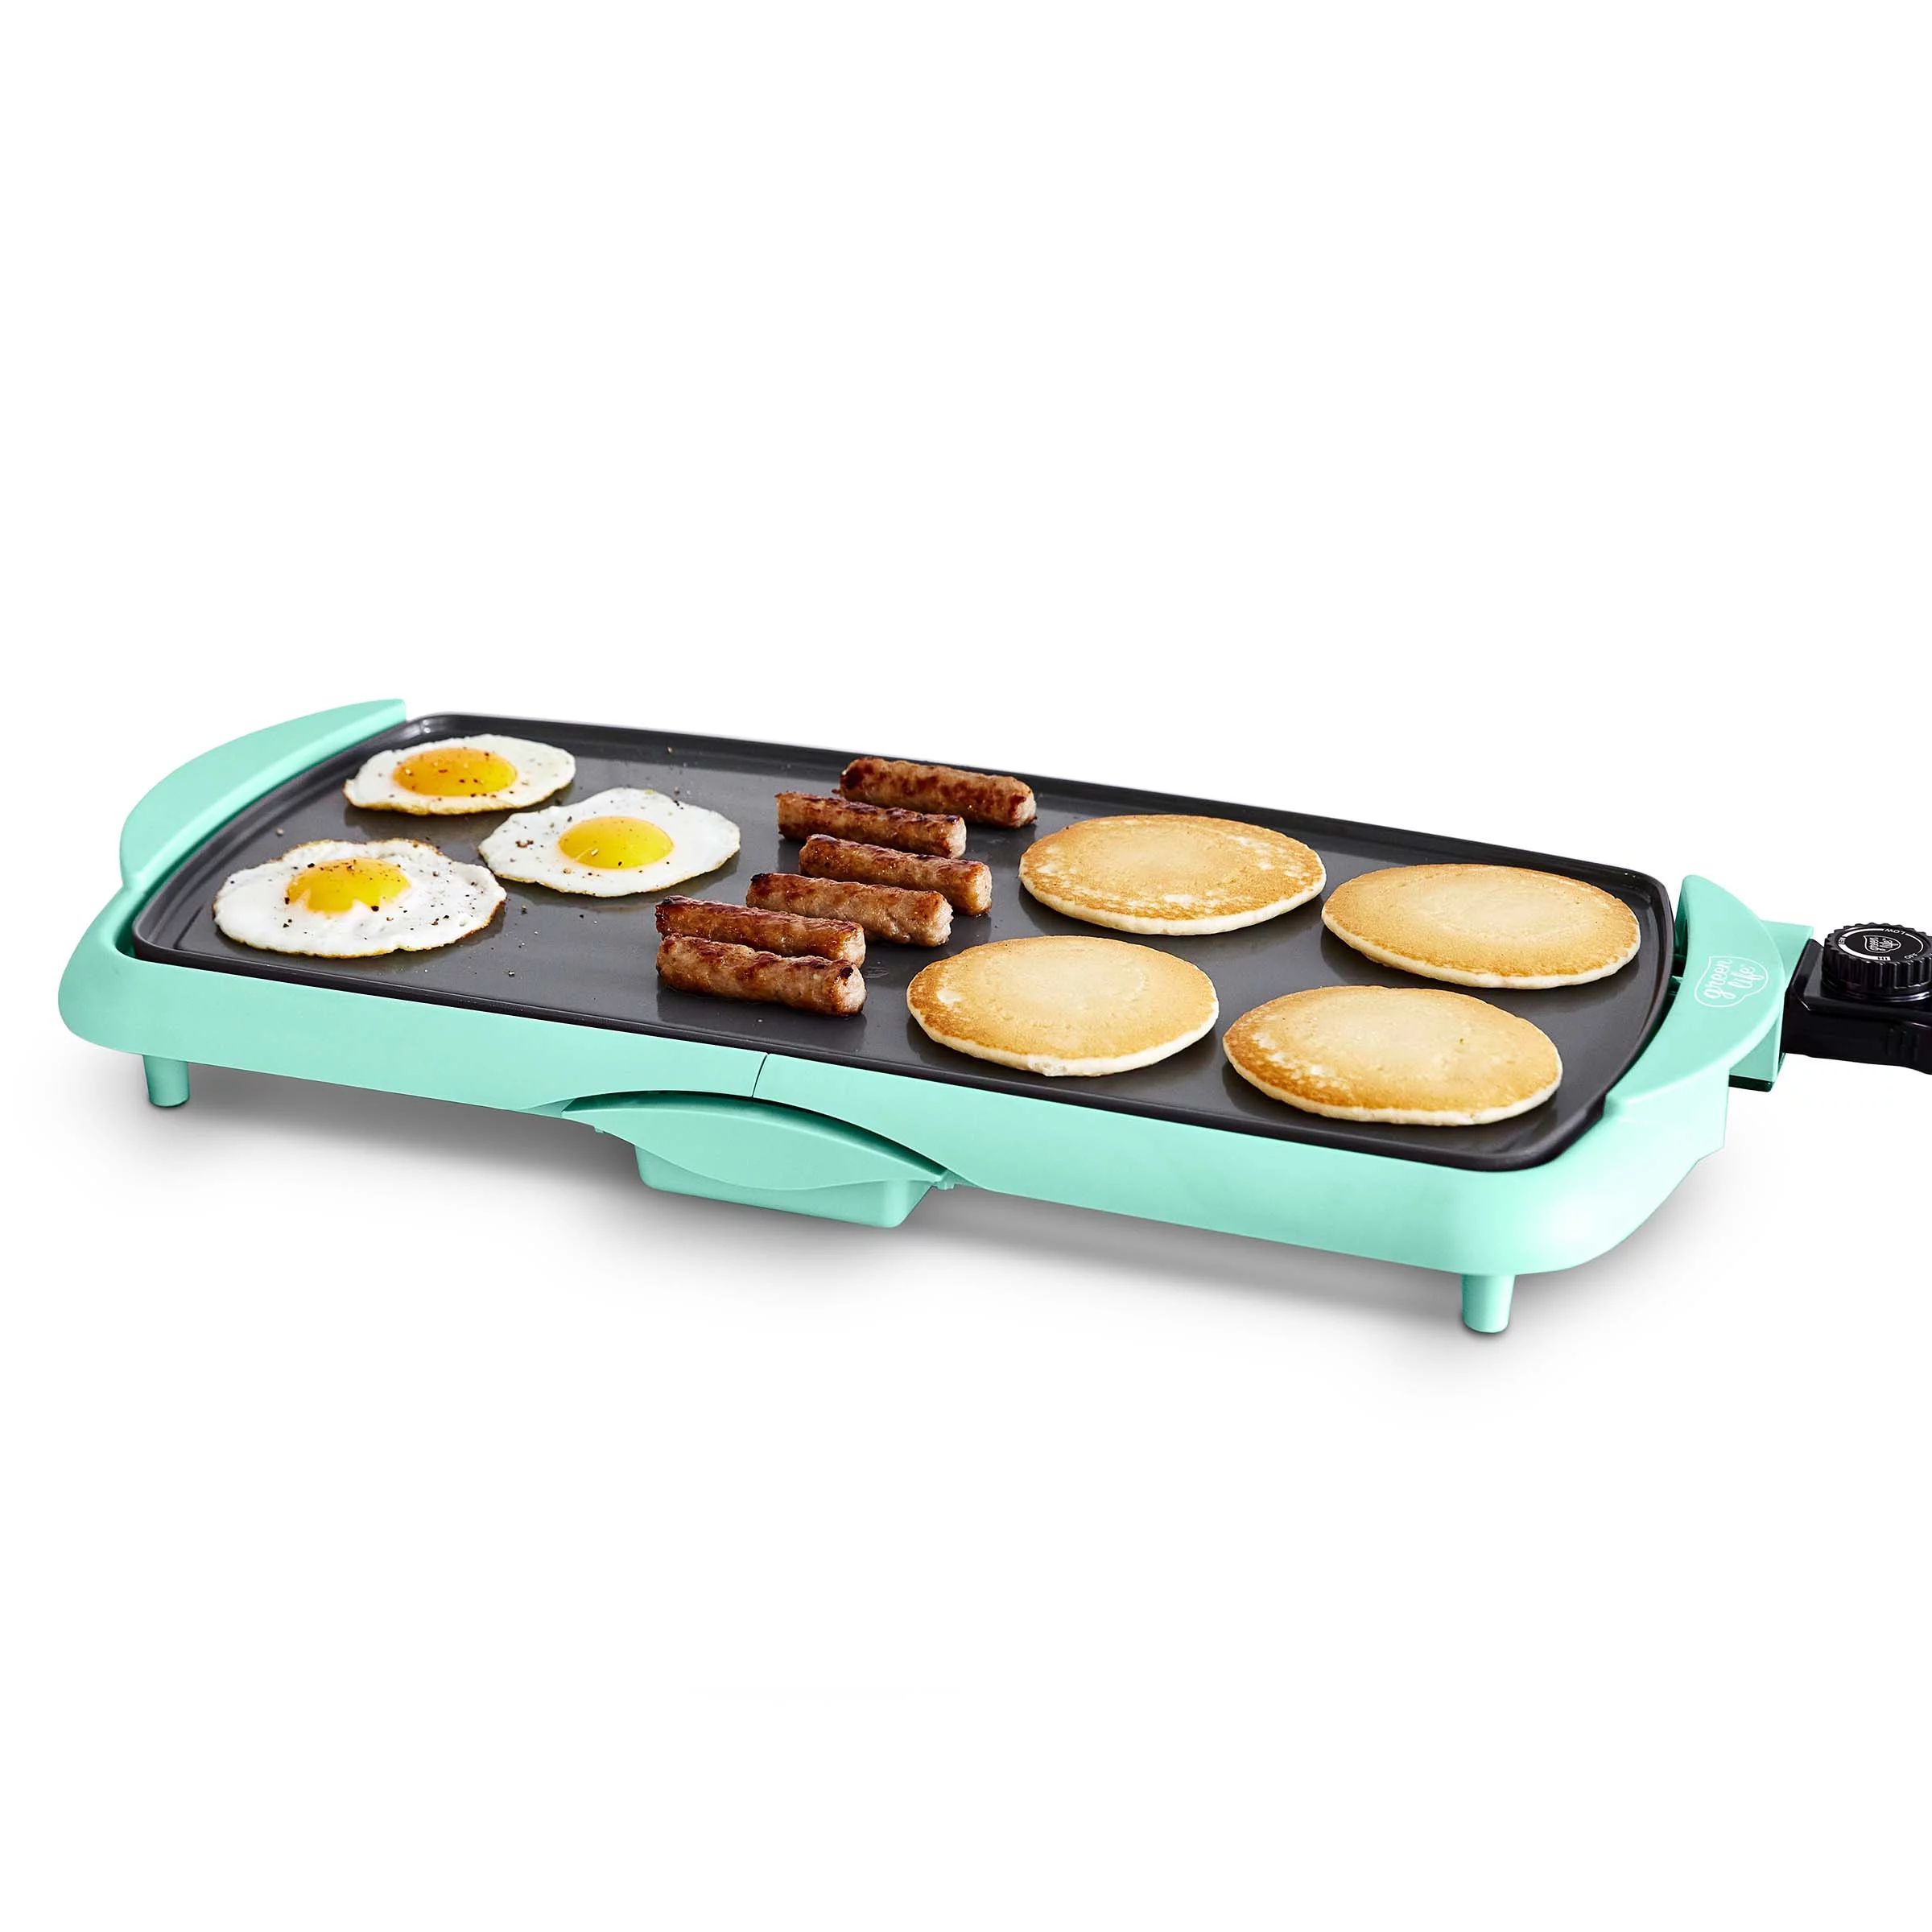 GreenLife Healthy Non-Stick Electric Griddle, Teal | Walmart (US)